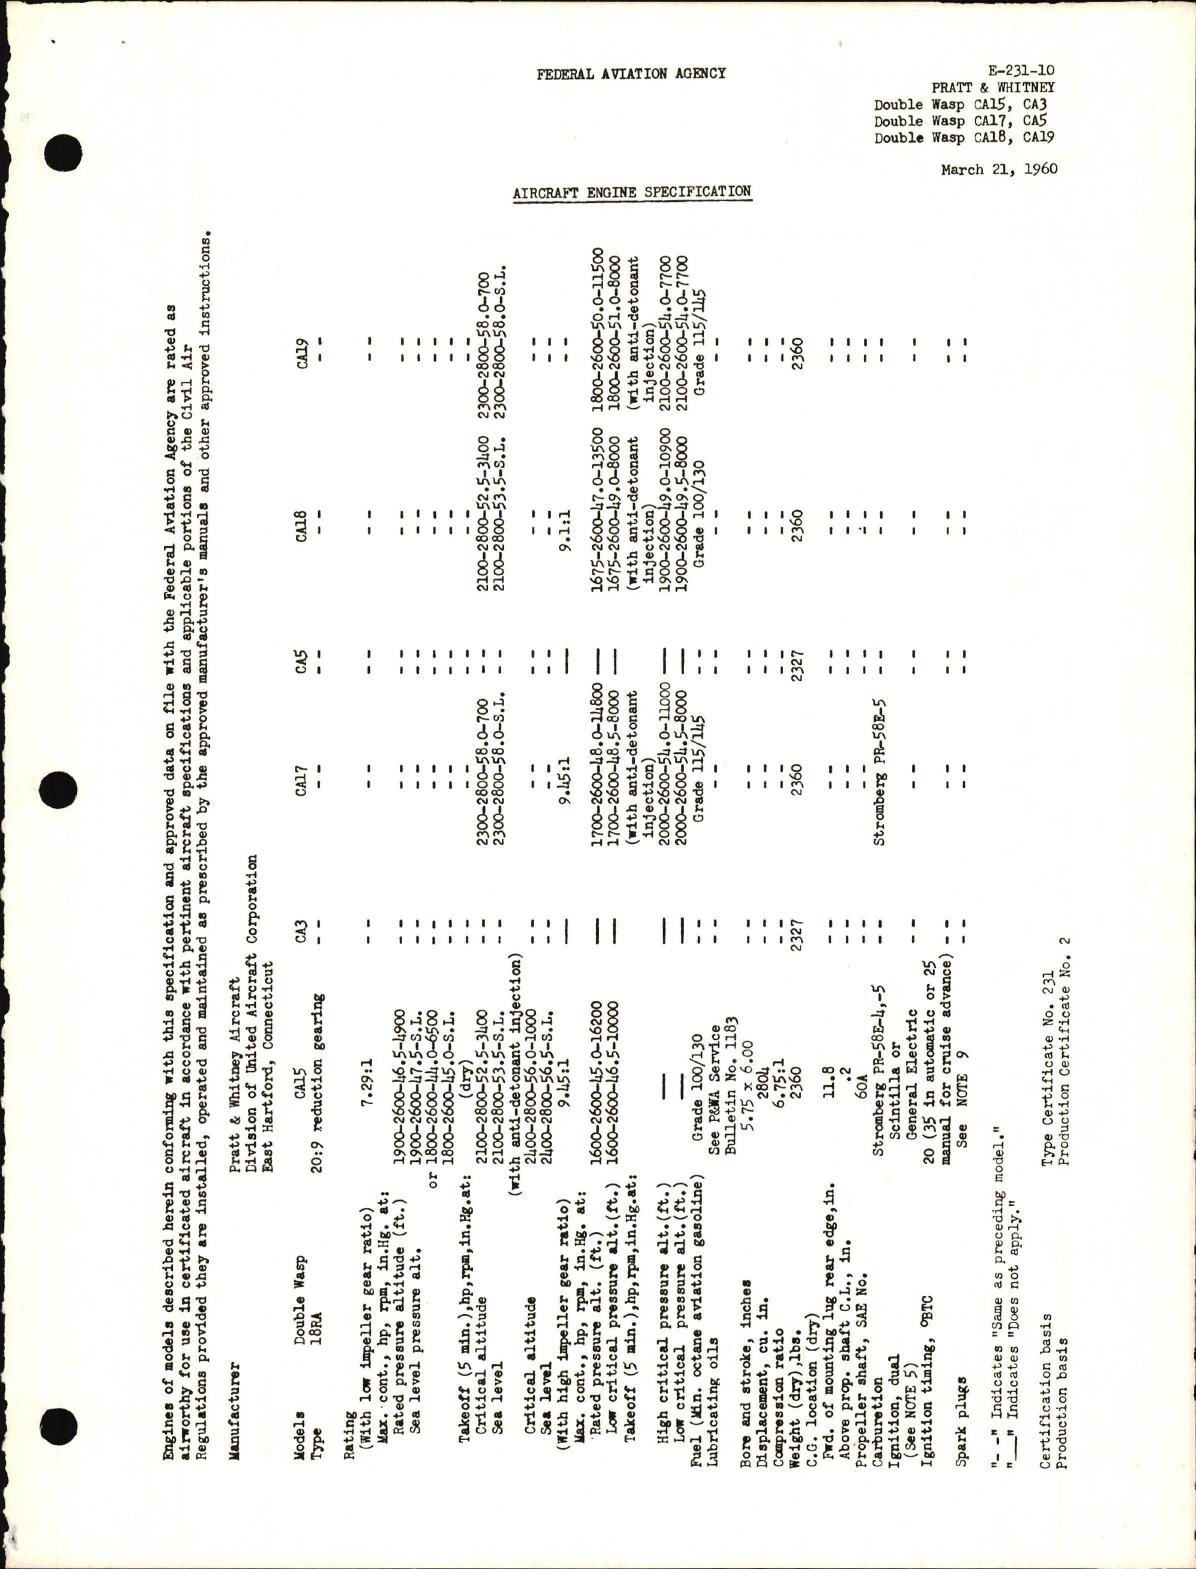 Sample page 1 from AirCorps Library document: CA Double Wasp